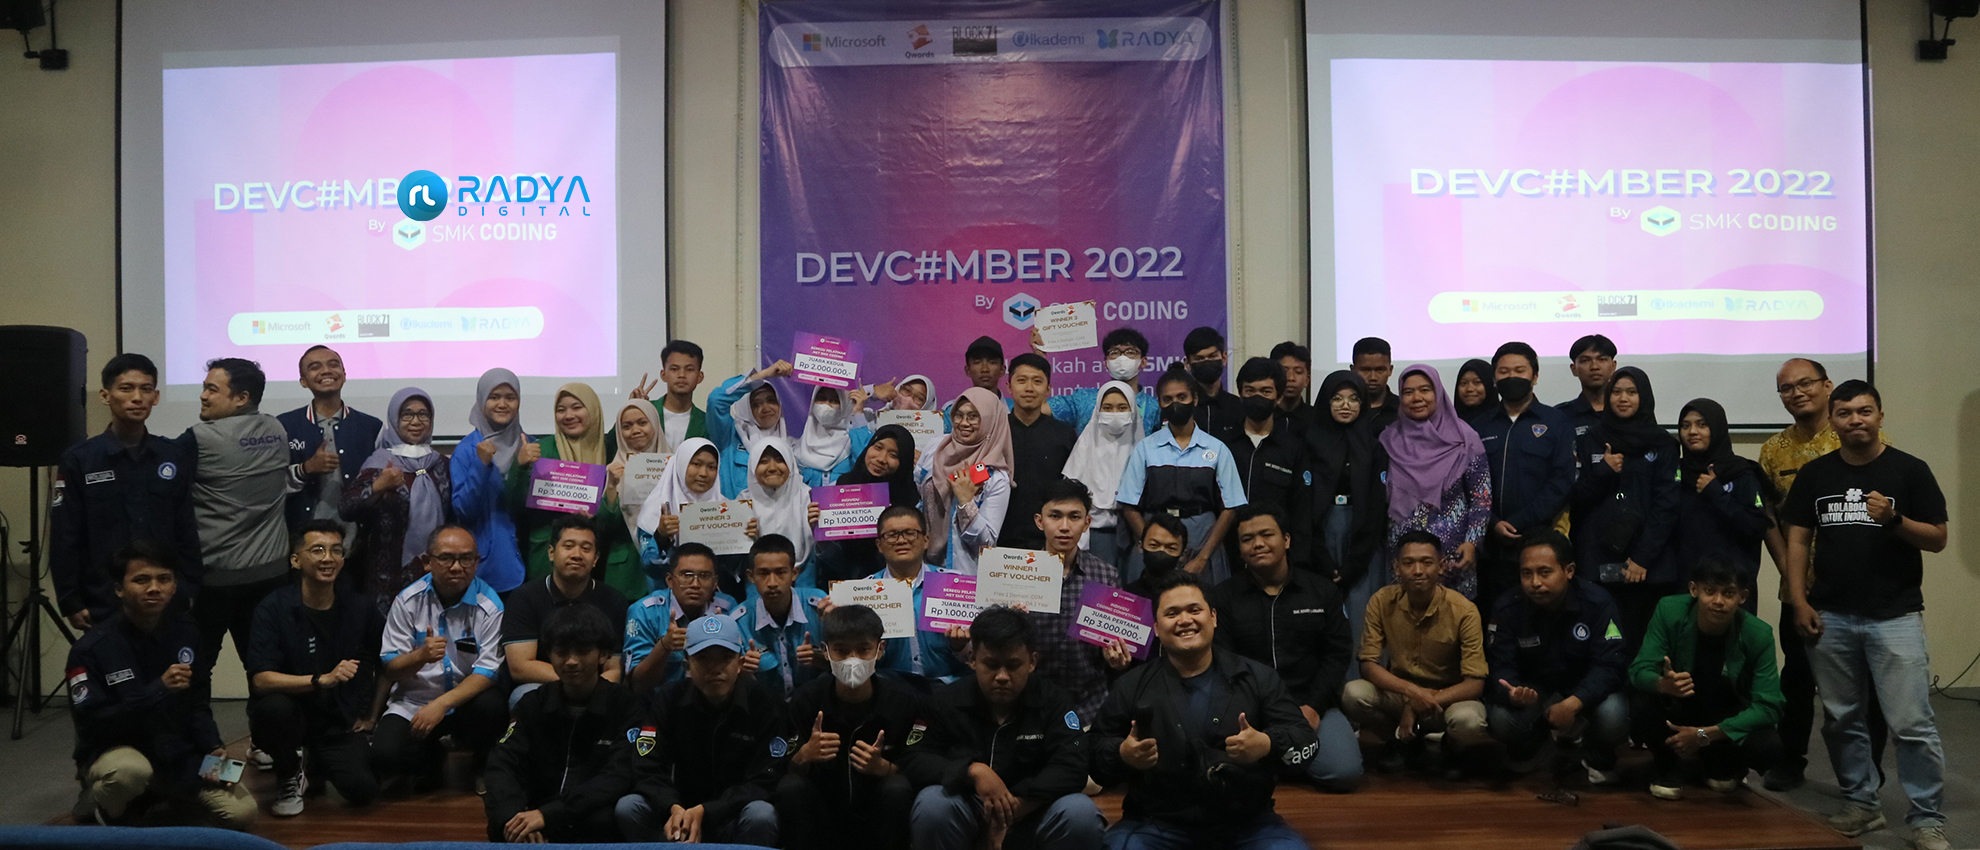 Image of DevC#mber 2022, First Steps for SMK to Become a .NET Developer